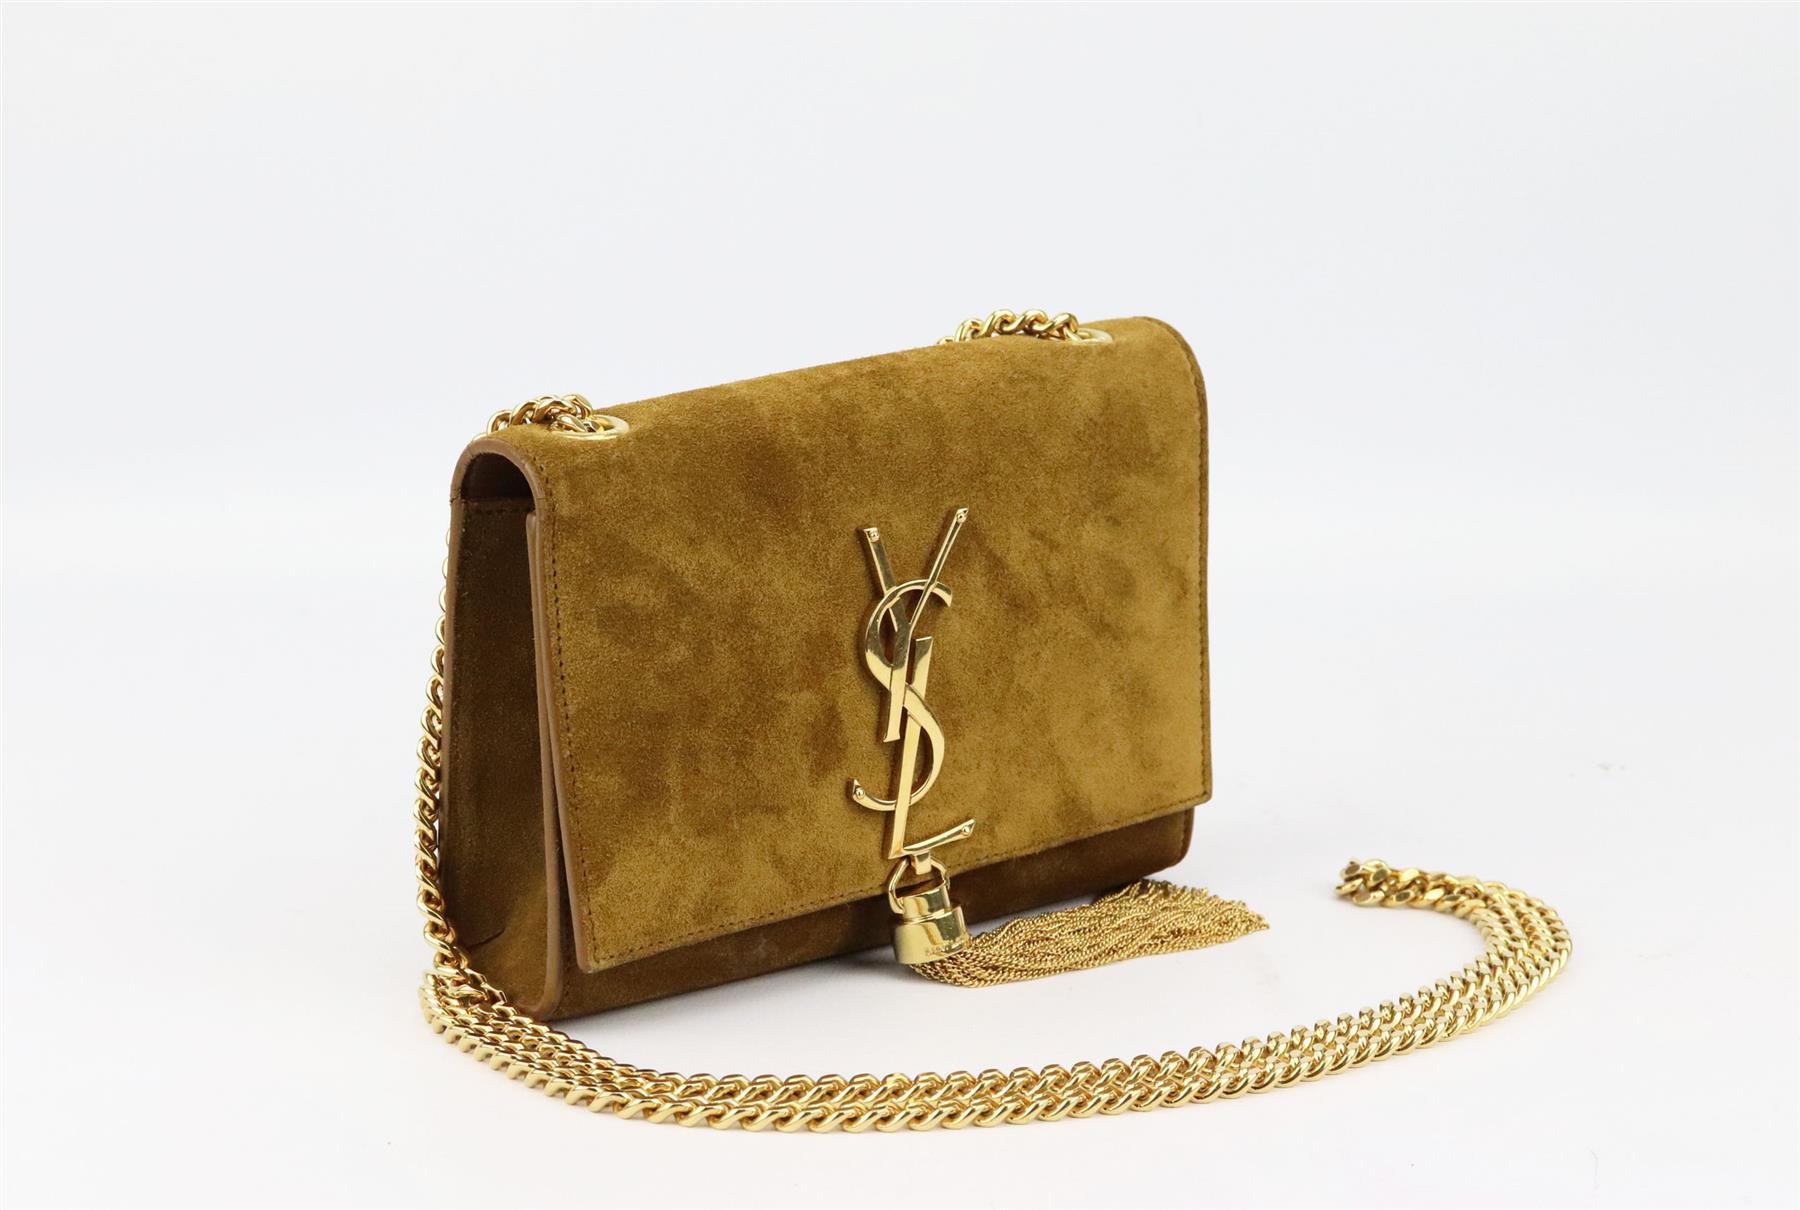 This 'Monogramme' bag by SAINT LAURENT will suit almost any occasion, embellished with the signature tassel-tipped 'YSL' plaque, it's been crafted in Italy from soft suede and has a durable chain strap that can be adjusted for a shorter drop. Tan